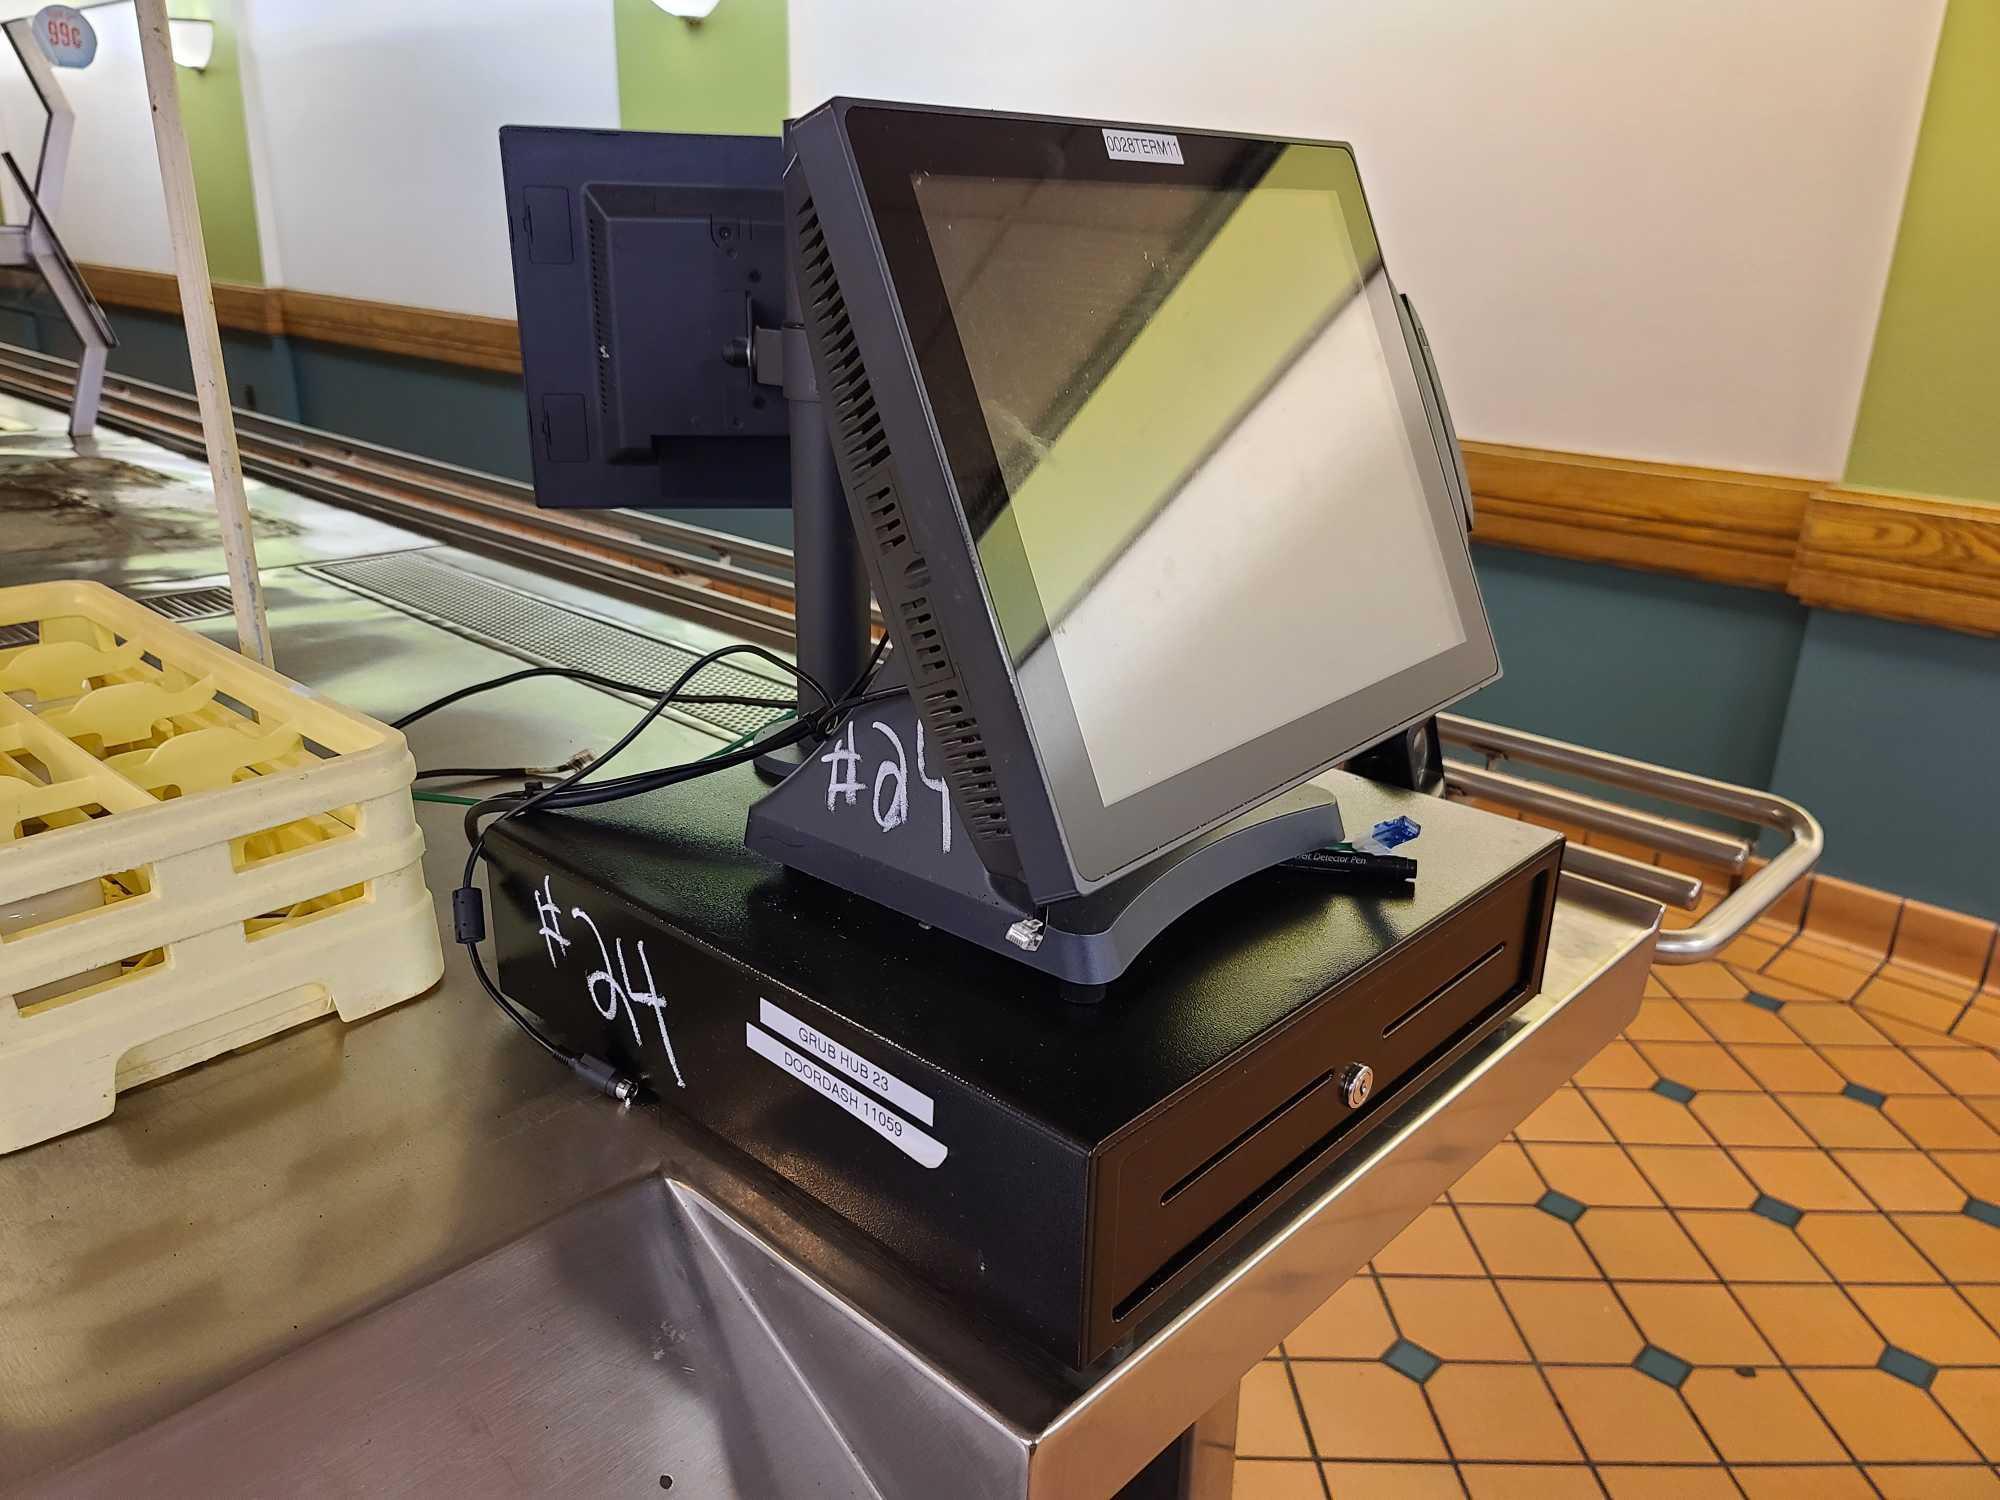 (3) Complete POS Sys. Total of (6)Touch Screen Monitors, (3) Card Reader Scanners, (2)Cash Drawers